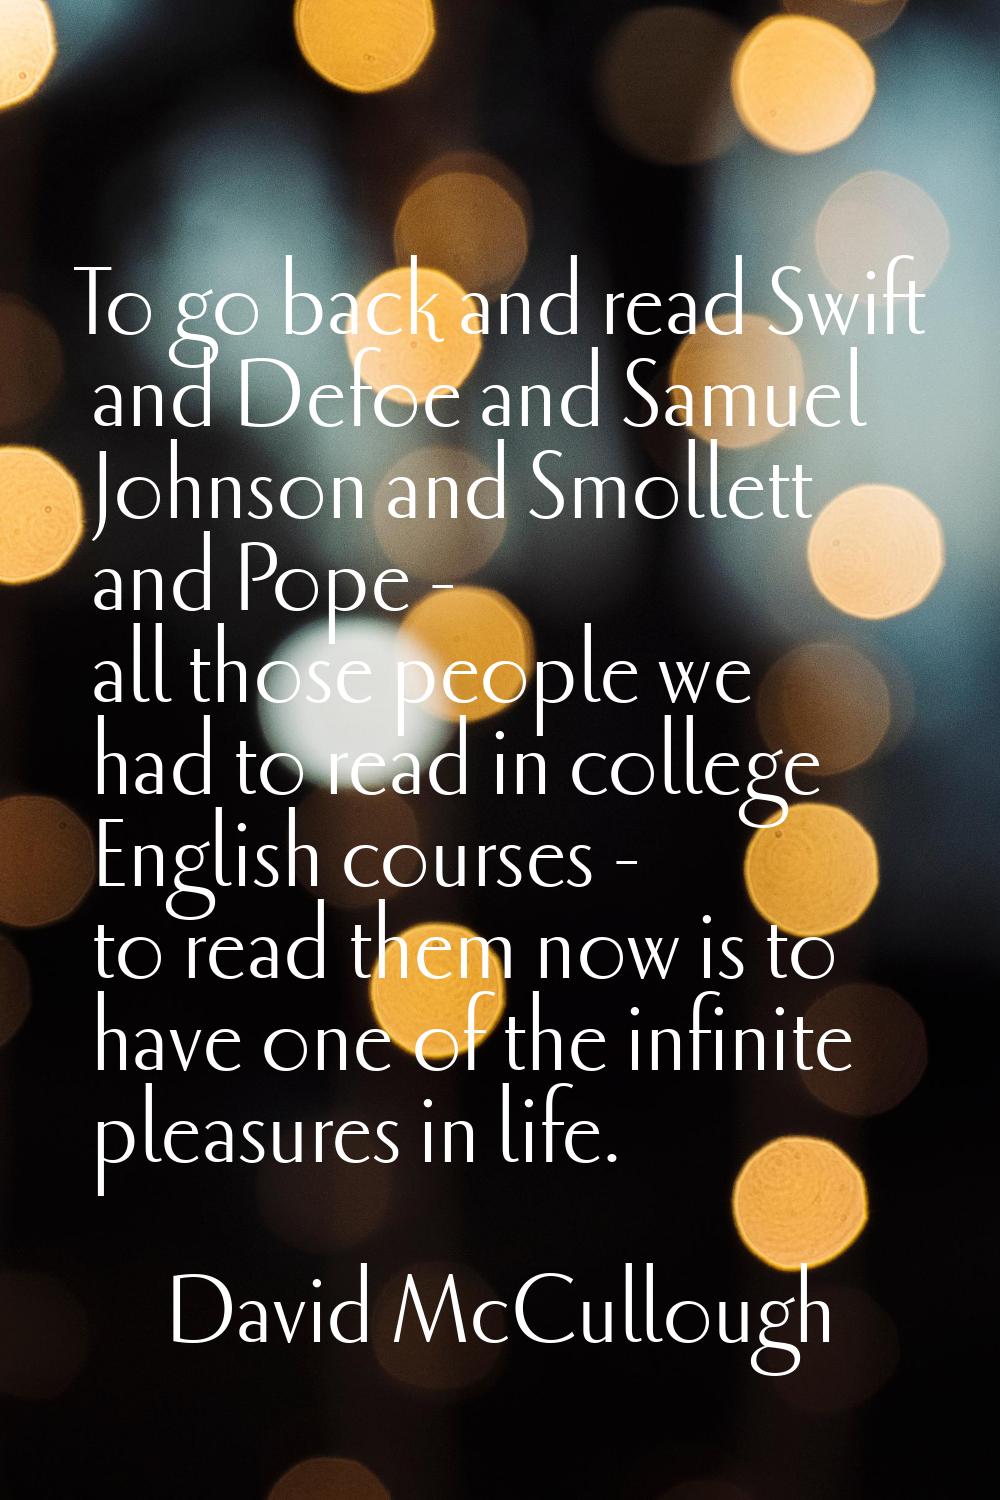 To go back and read Swift and Defoe and Samuel Johnson and Smollett and Pope - all those people we 